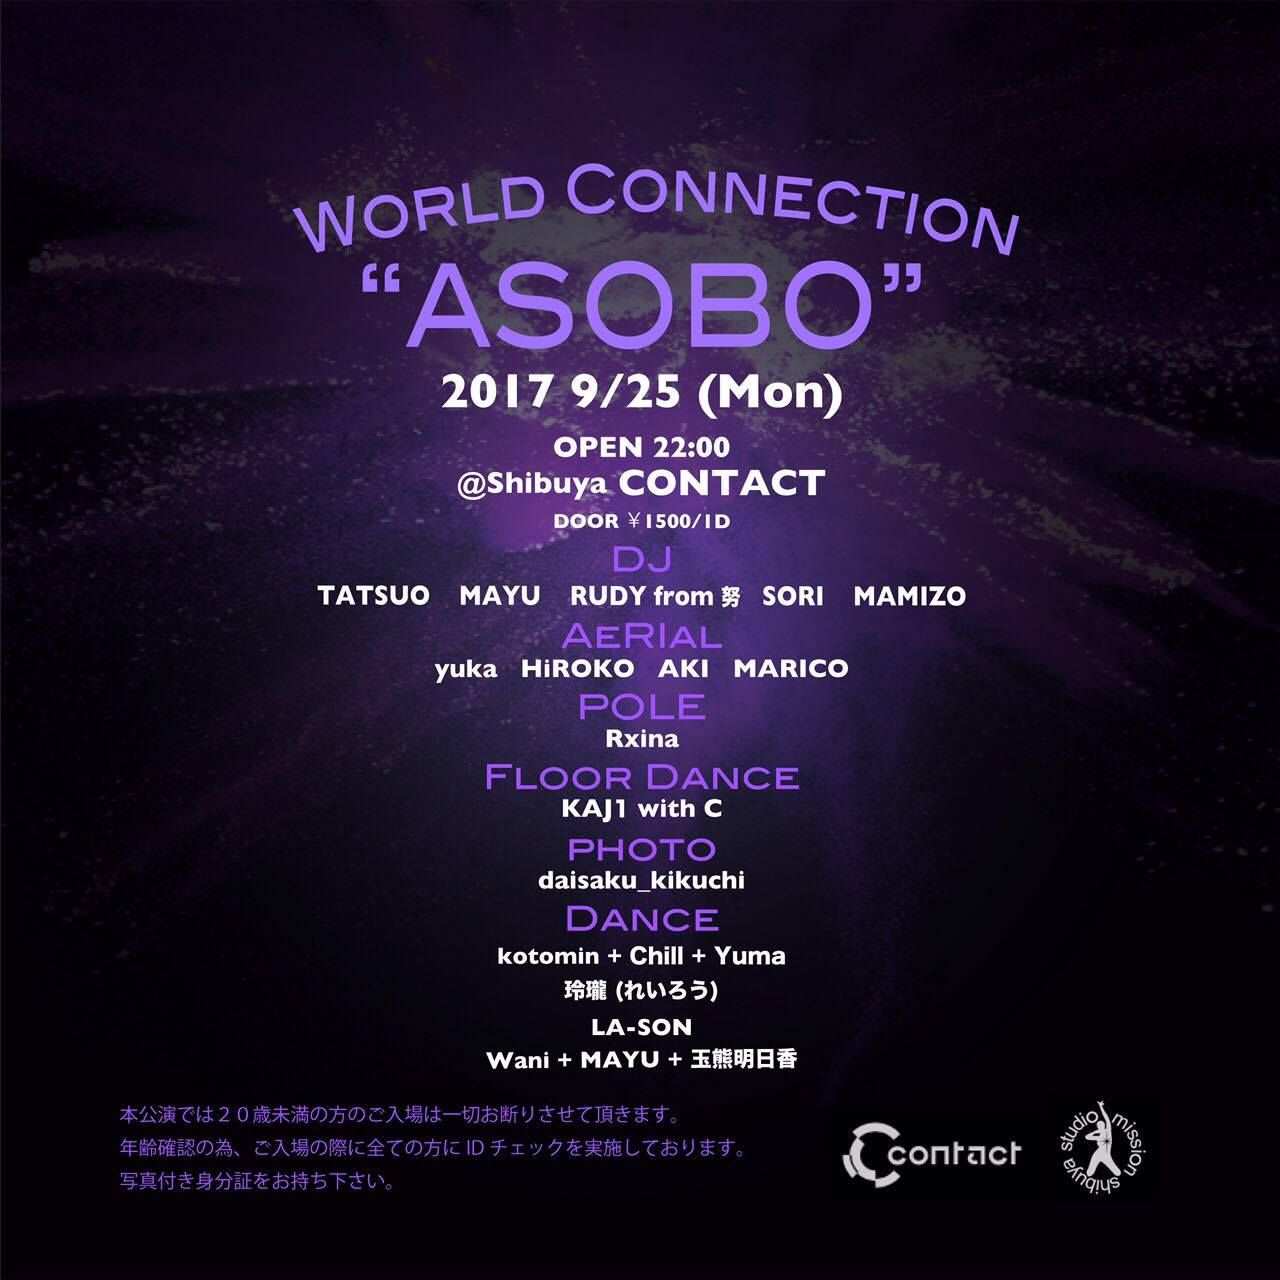 World Connection "ASOBO"